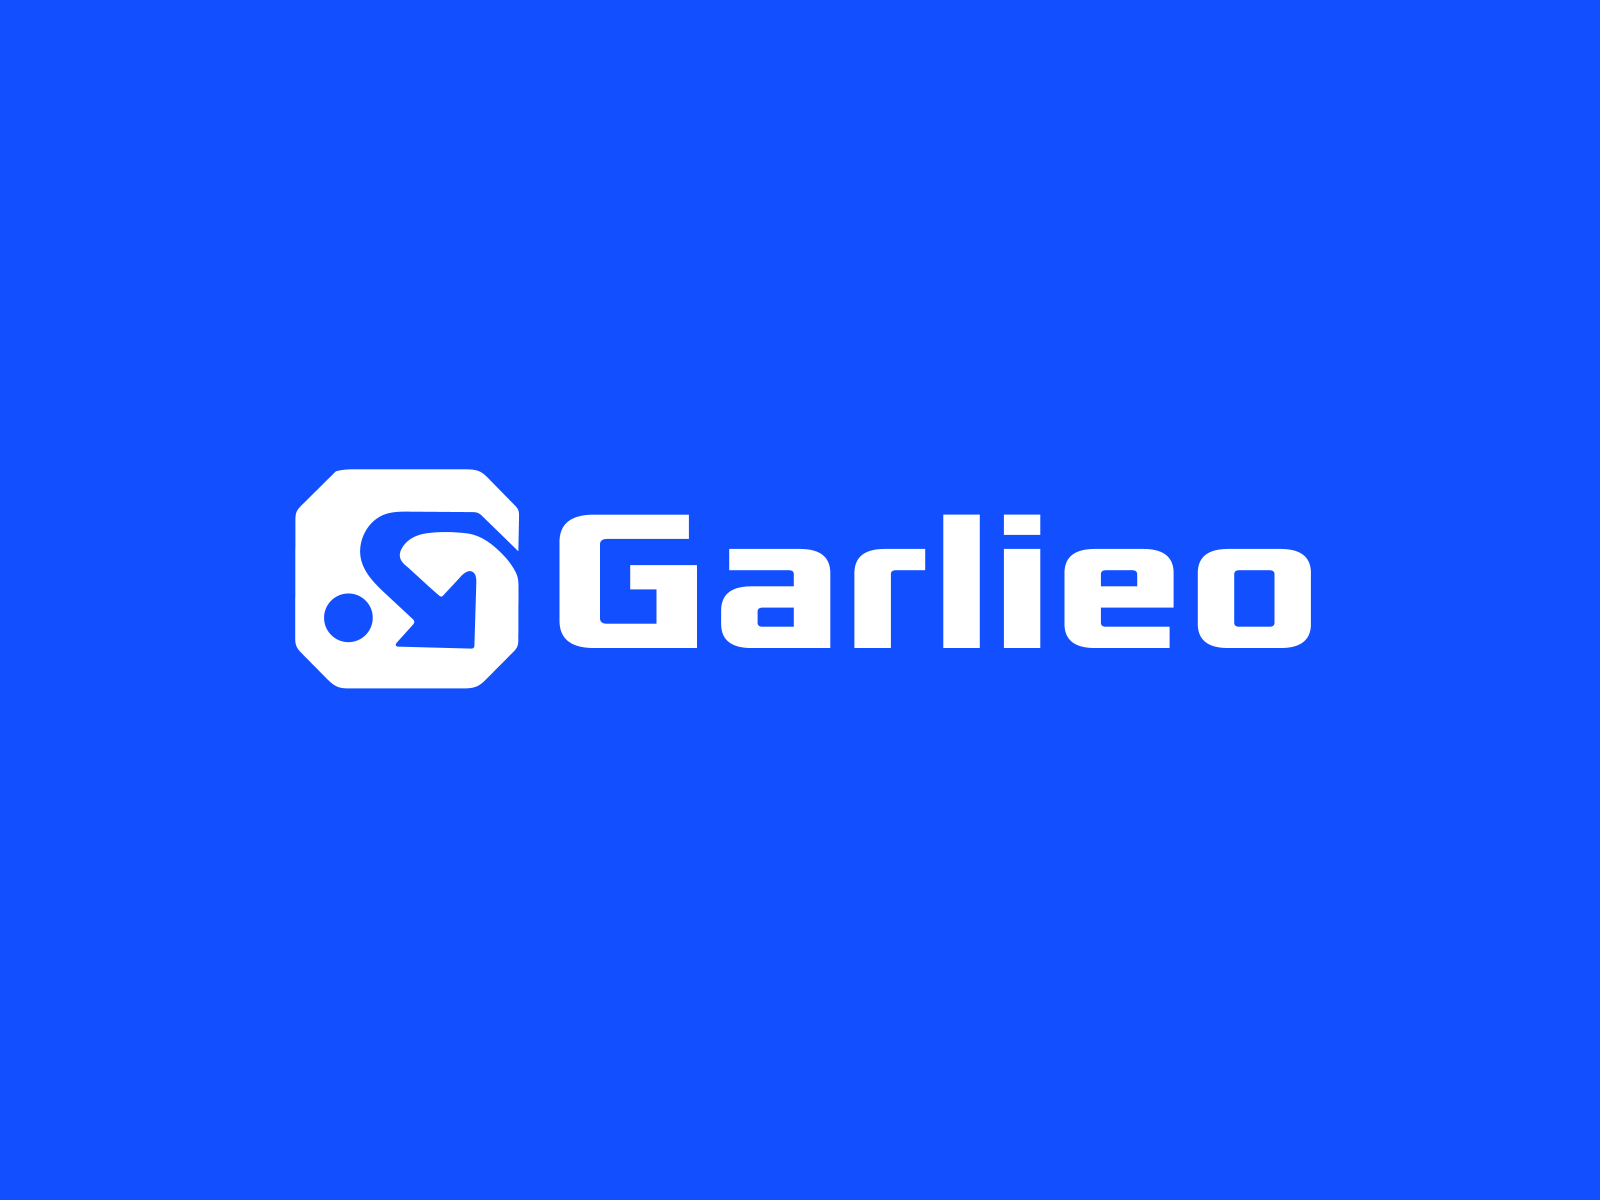 Garlieo logo concept by Infoblox on Dribbble